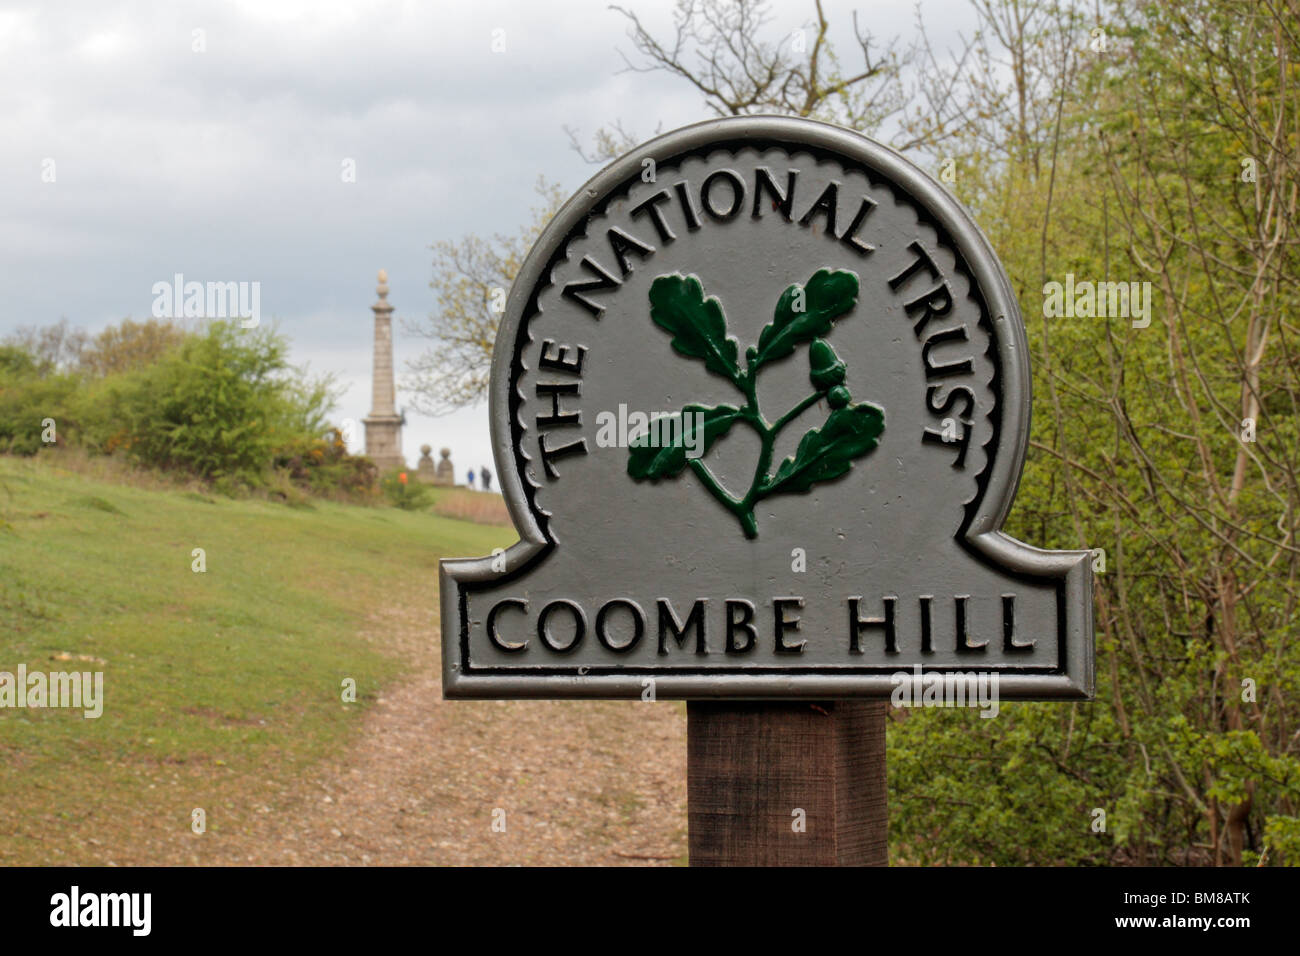 National Trust sign at entrance to Coombe Hill NT property with Coombe Hill Monument behind. (IMPT: See notes) May 2010 Stock Photo